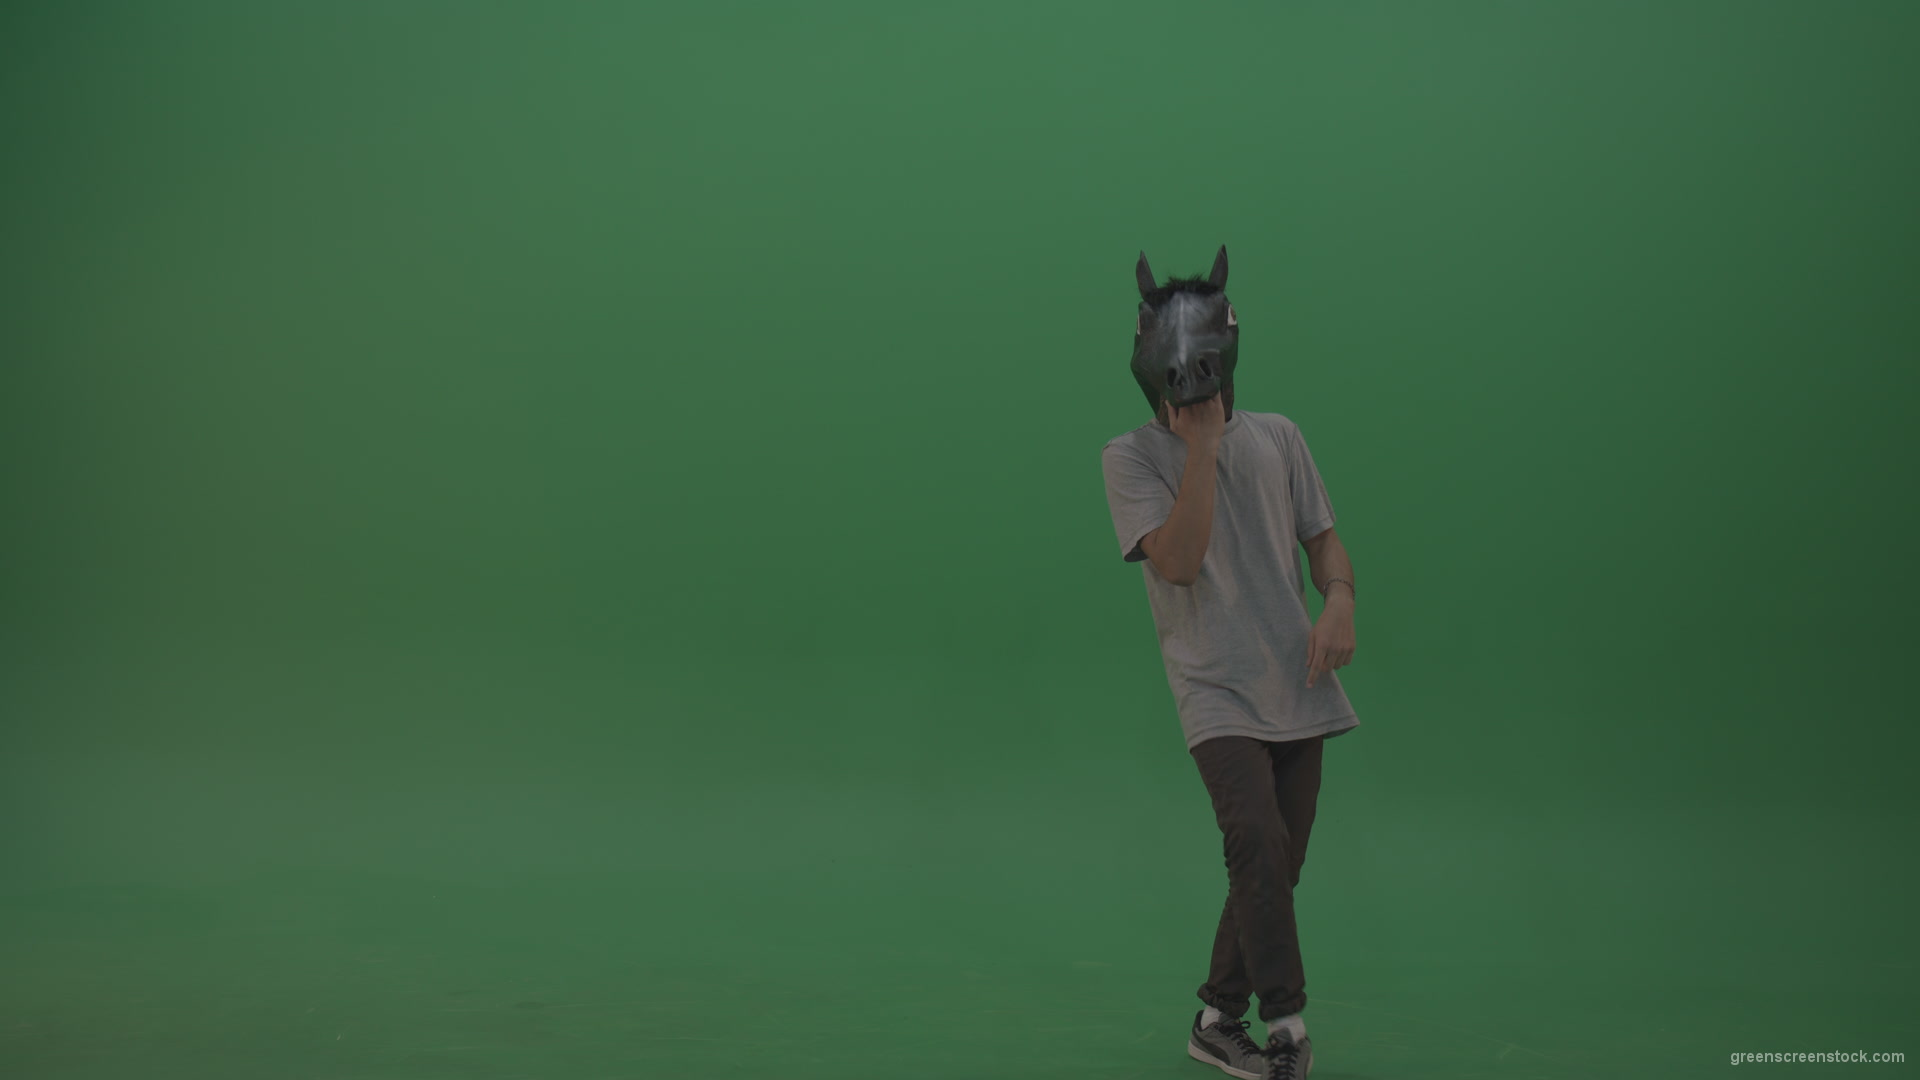 Boy-in-grey-wear-and-horse-head-costume-dances-over-green-screen-background_007 Green Screen Stock